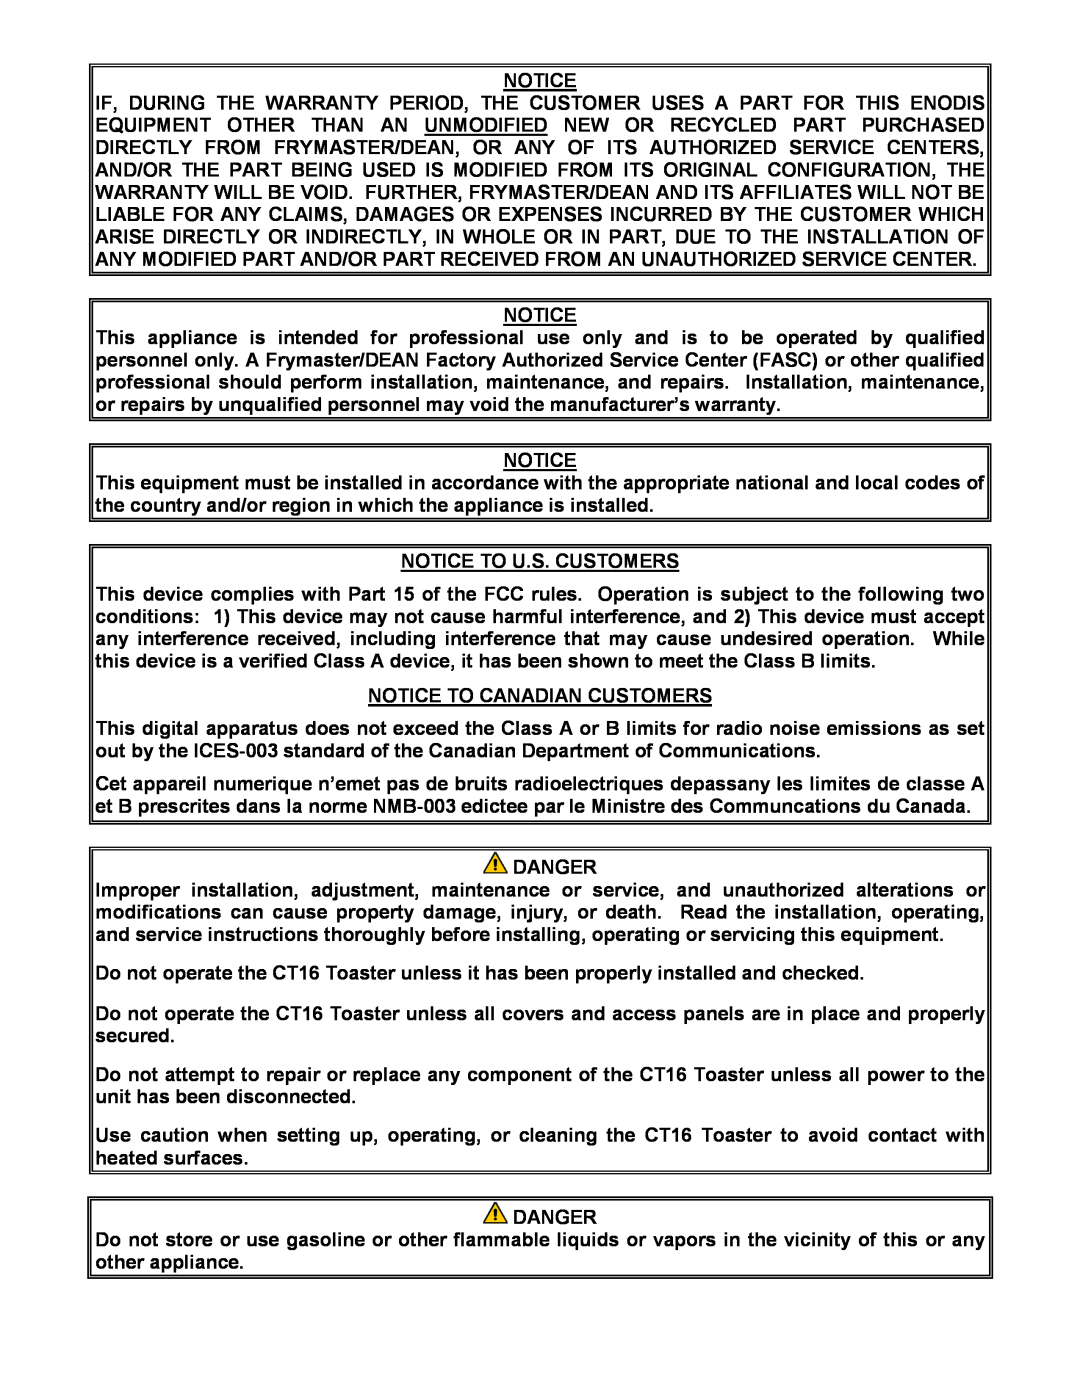 Frymaster CT16 operation manual Notice To U.S. Customers, Notice To Canadian Customers, Danger 